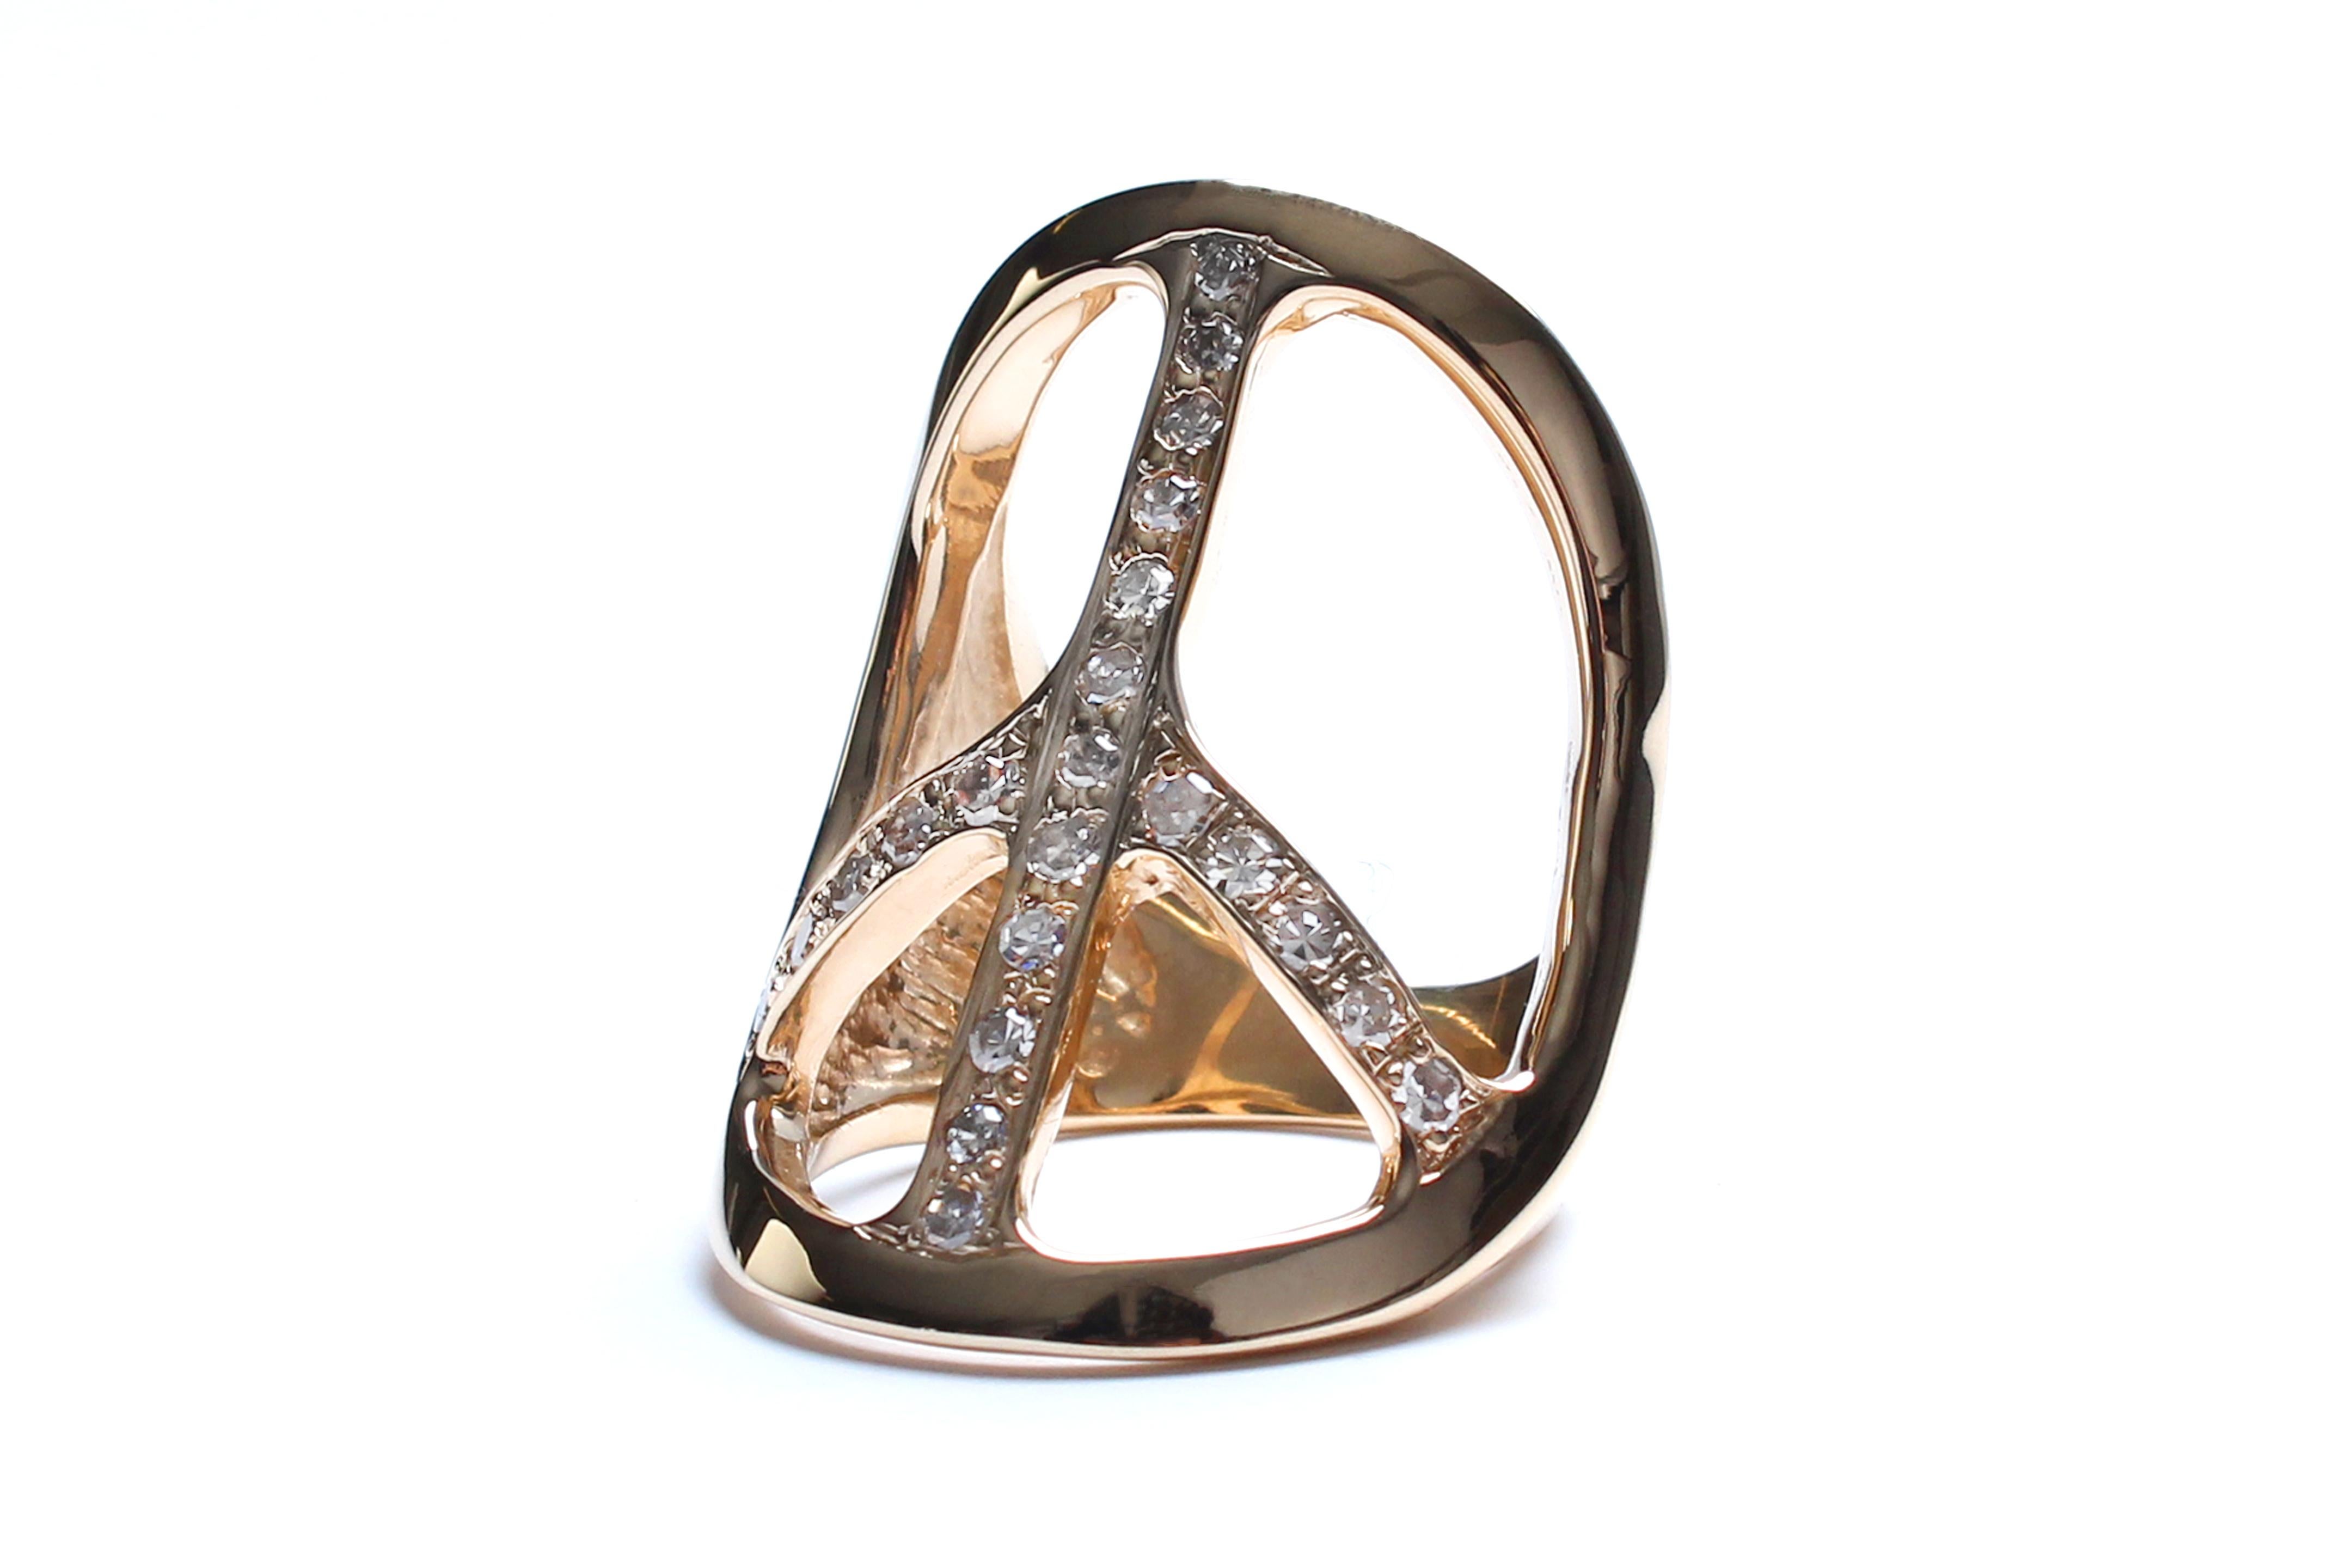 Contemporary Clarissa Bronfman Sterling Silver 14 Karat Gold Plated Diamond Peace Ring